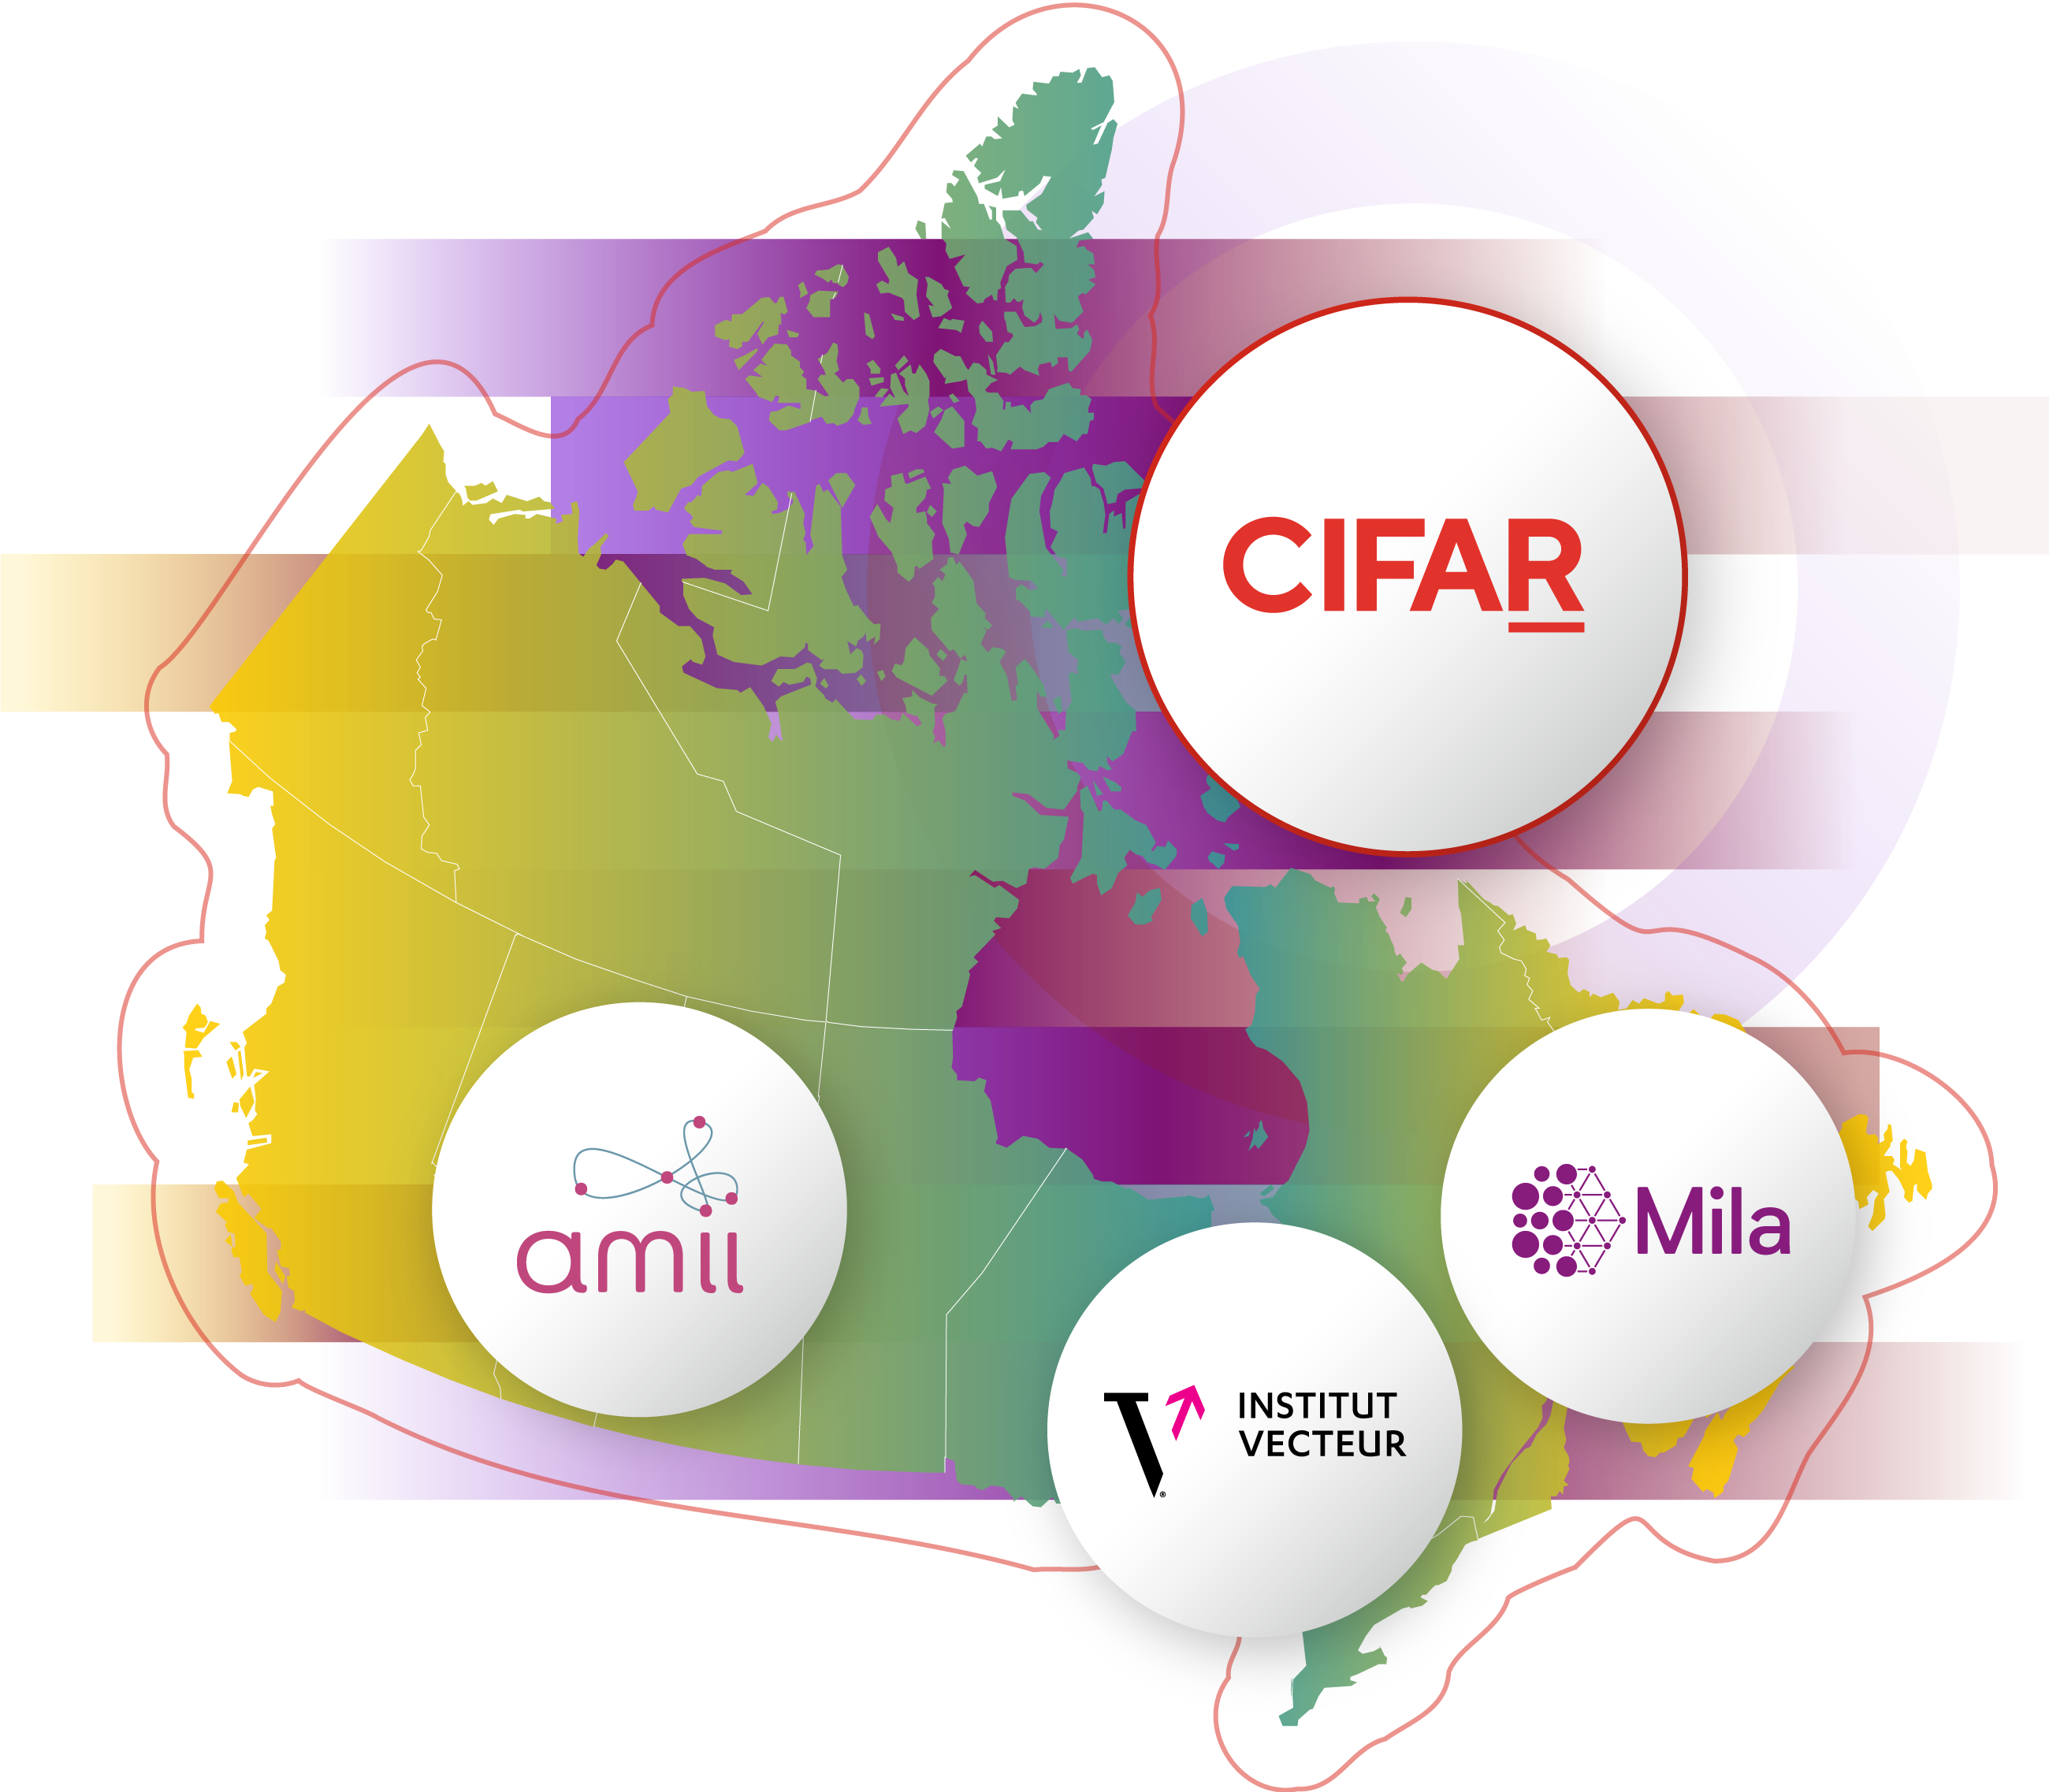 Map of Canada with CIFAR, amii, Vector Institute and Mila logos